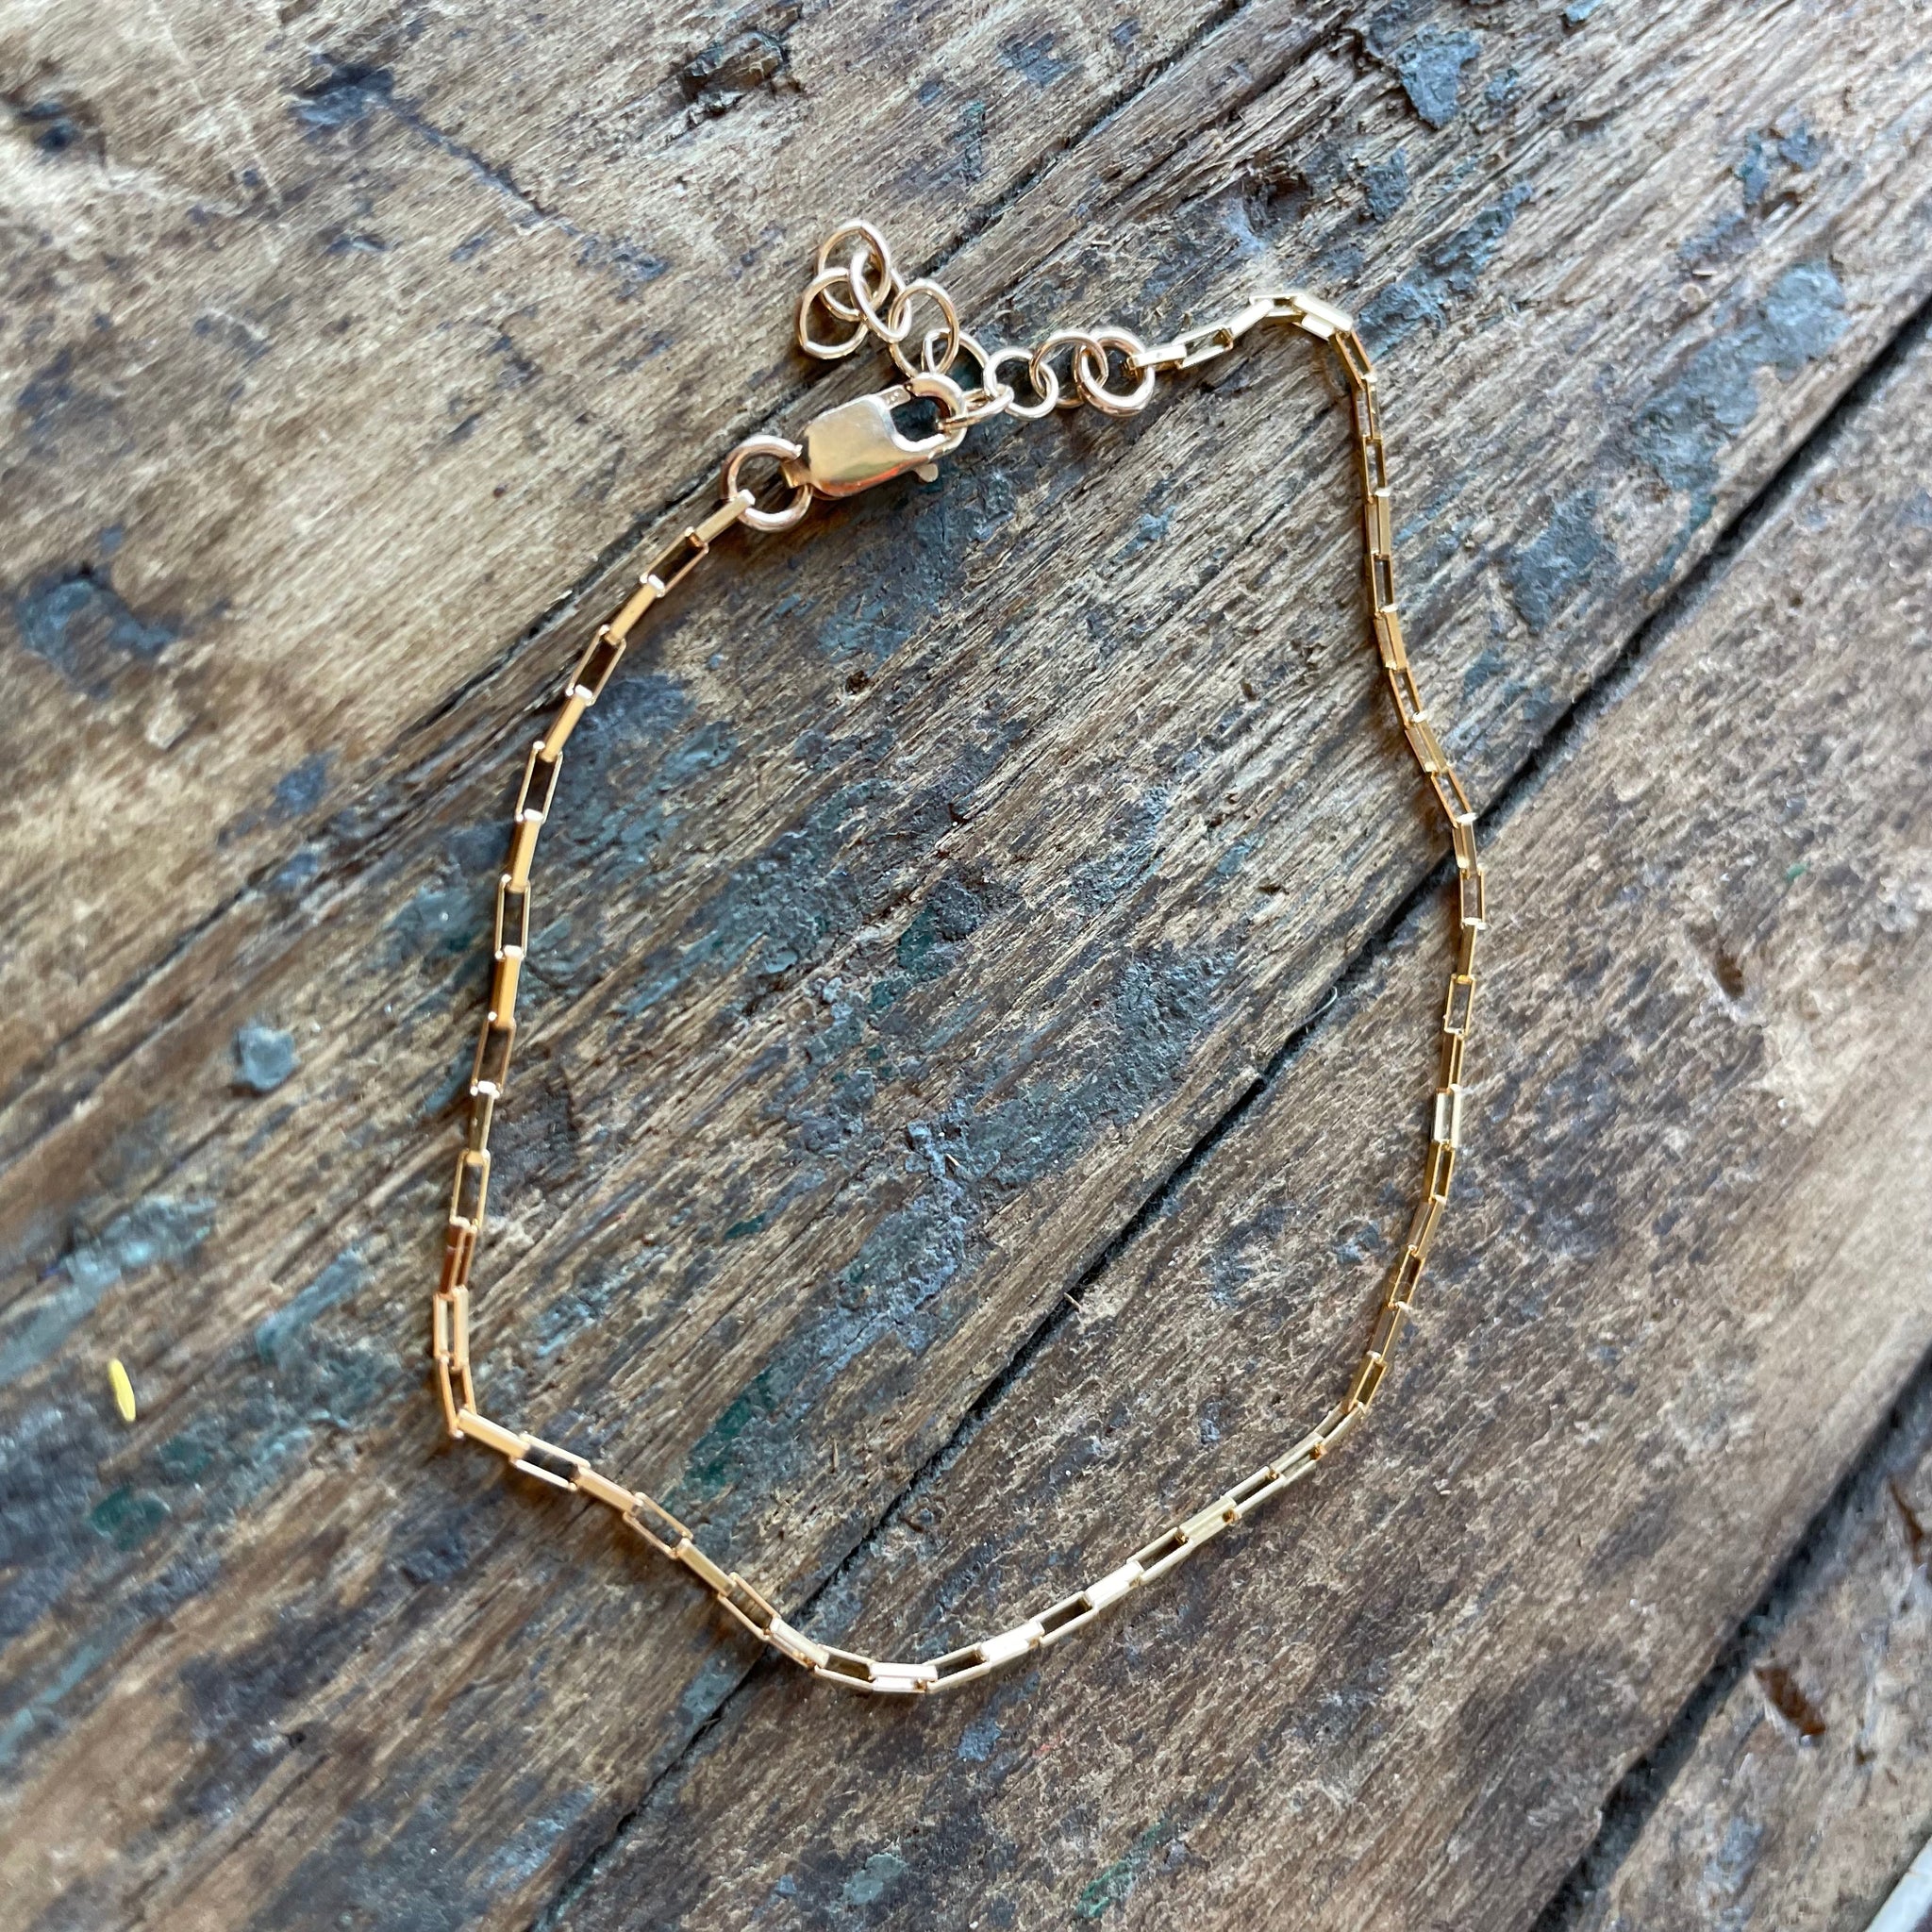 Lana Square Chain Bracelet by Son of a Sailor